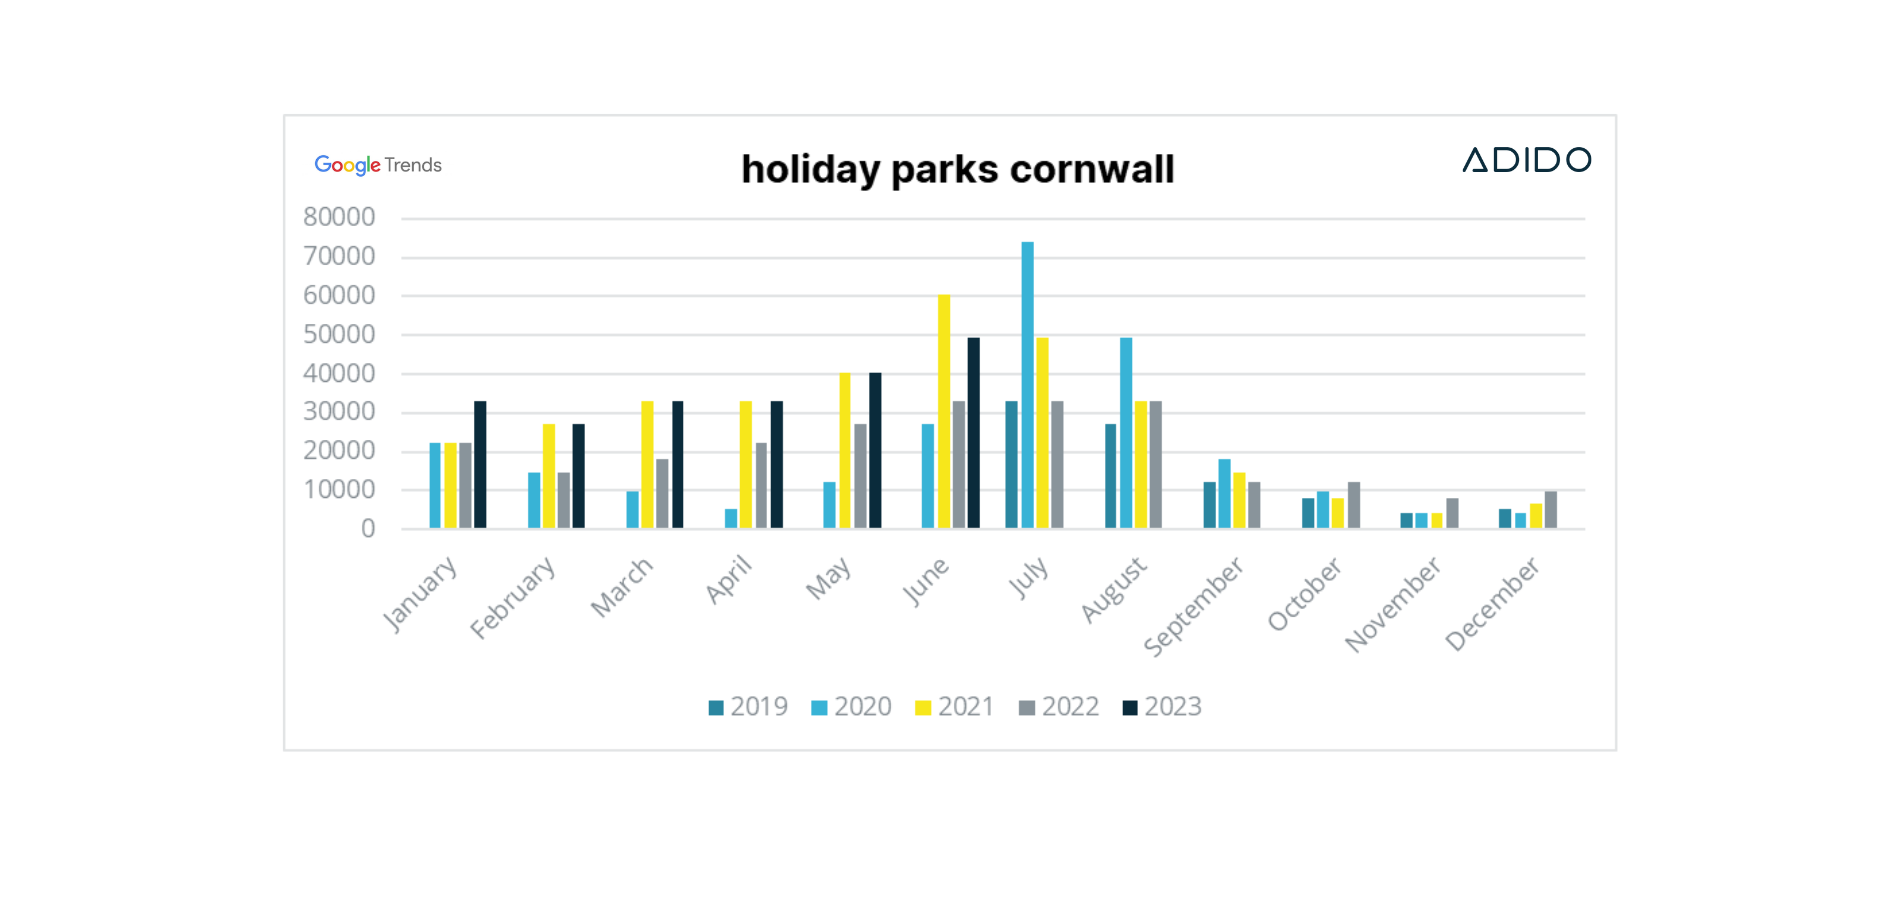 Holiday parks cornwall search trend 2019 2023